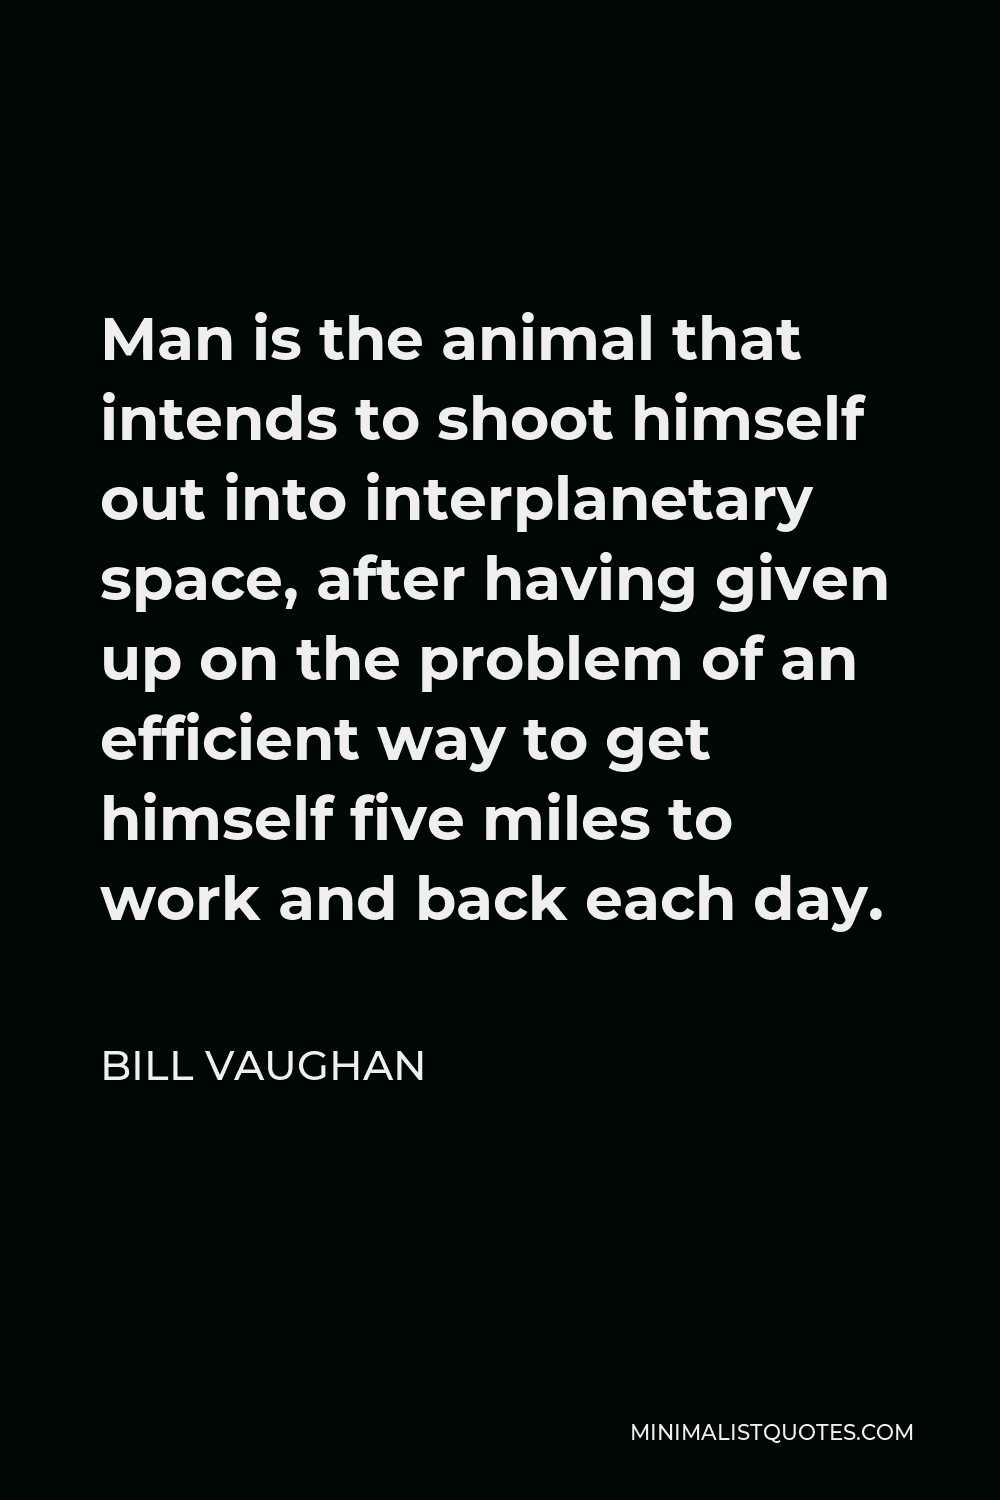 Bill Vaughan Quote - Man is the animal that intends to shoot himself out into interplanetary space, after having given up on the problem of an efficient way to get himself five miles to work and back each day.